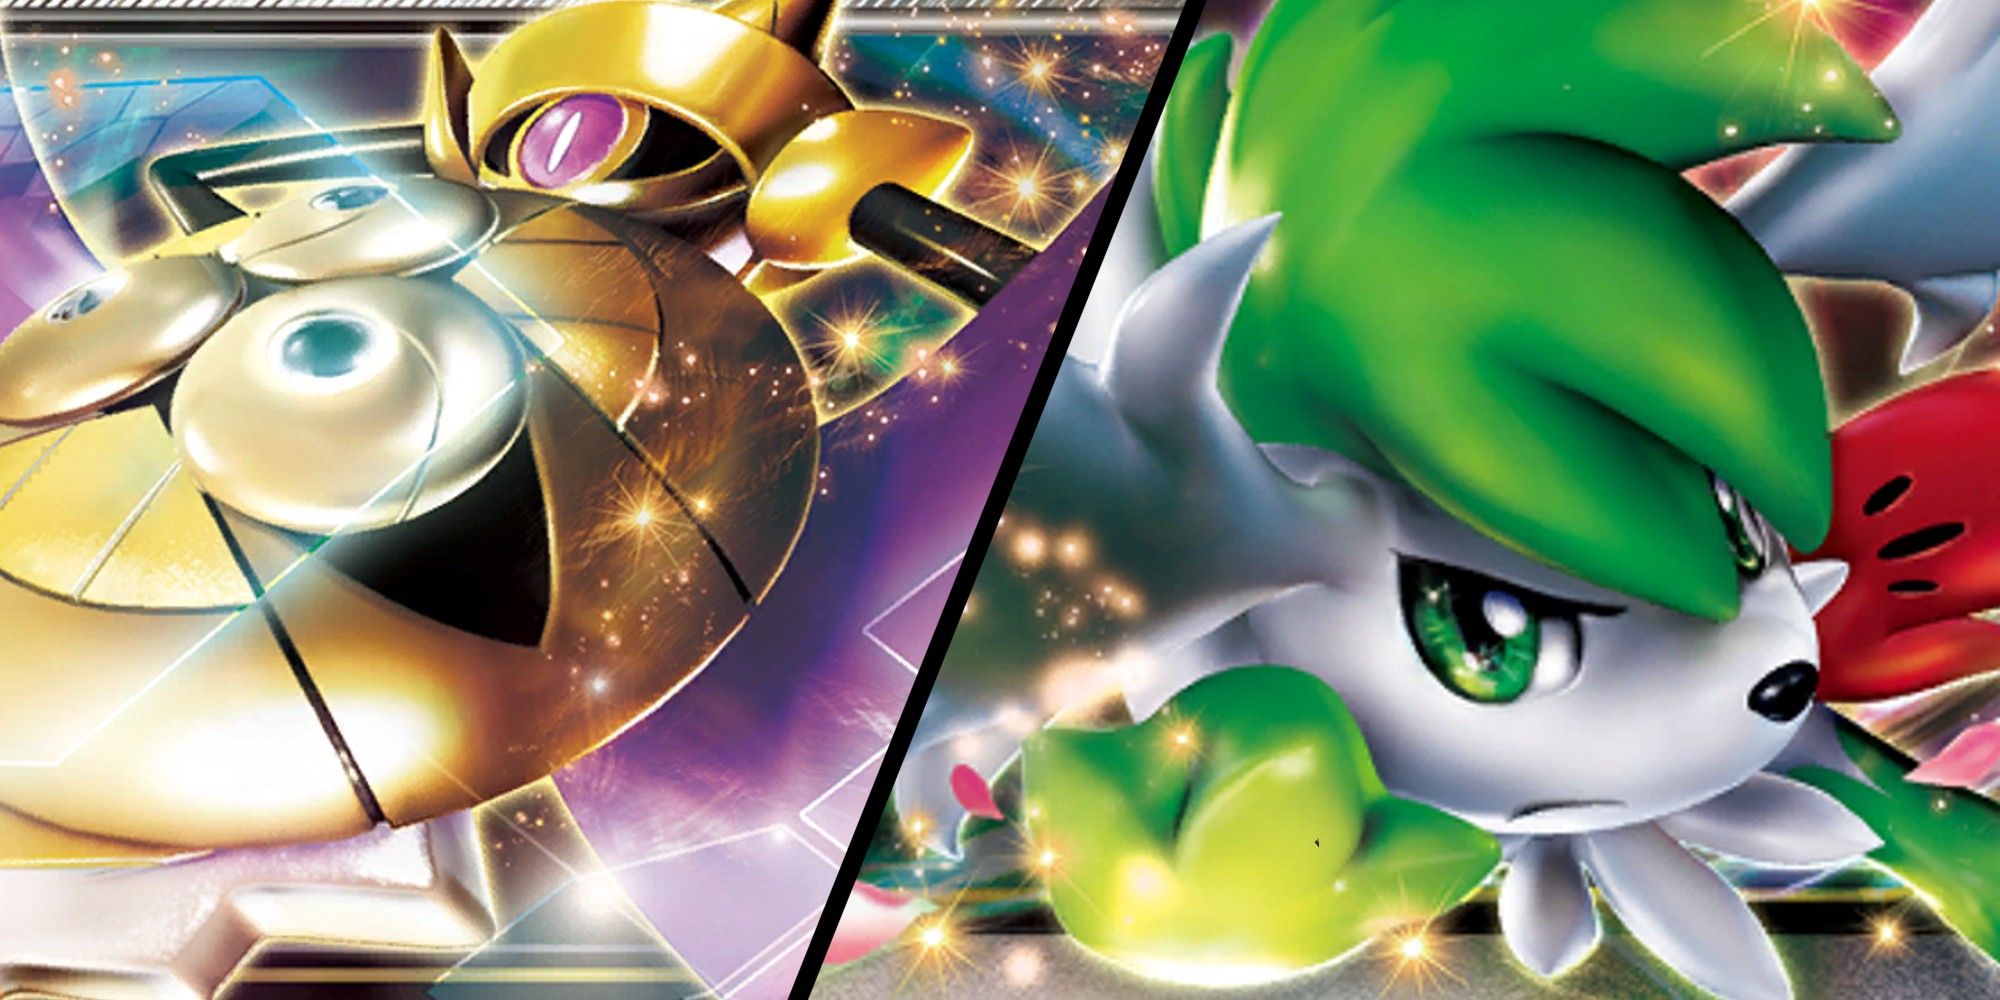 Pokemon TCG: Best Ex Cards Of All Time Feature Image. Aegislash on the left and Shaymin on the right